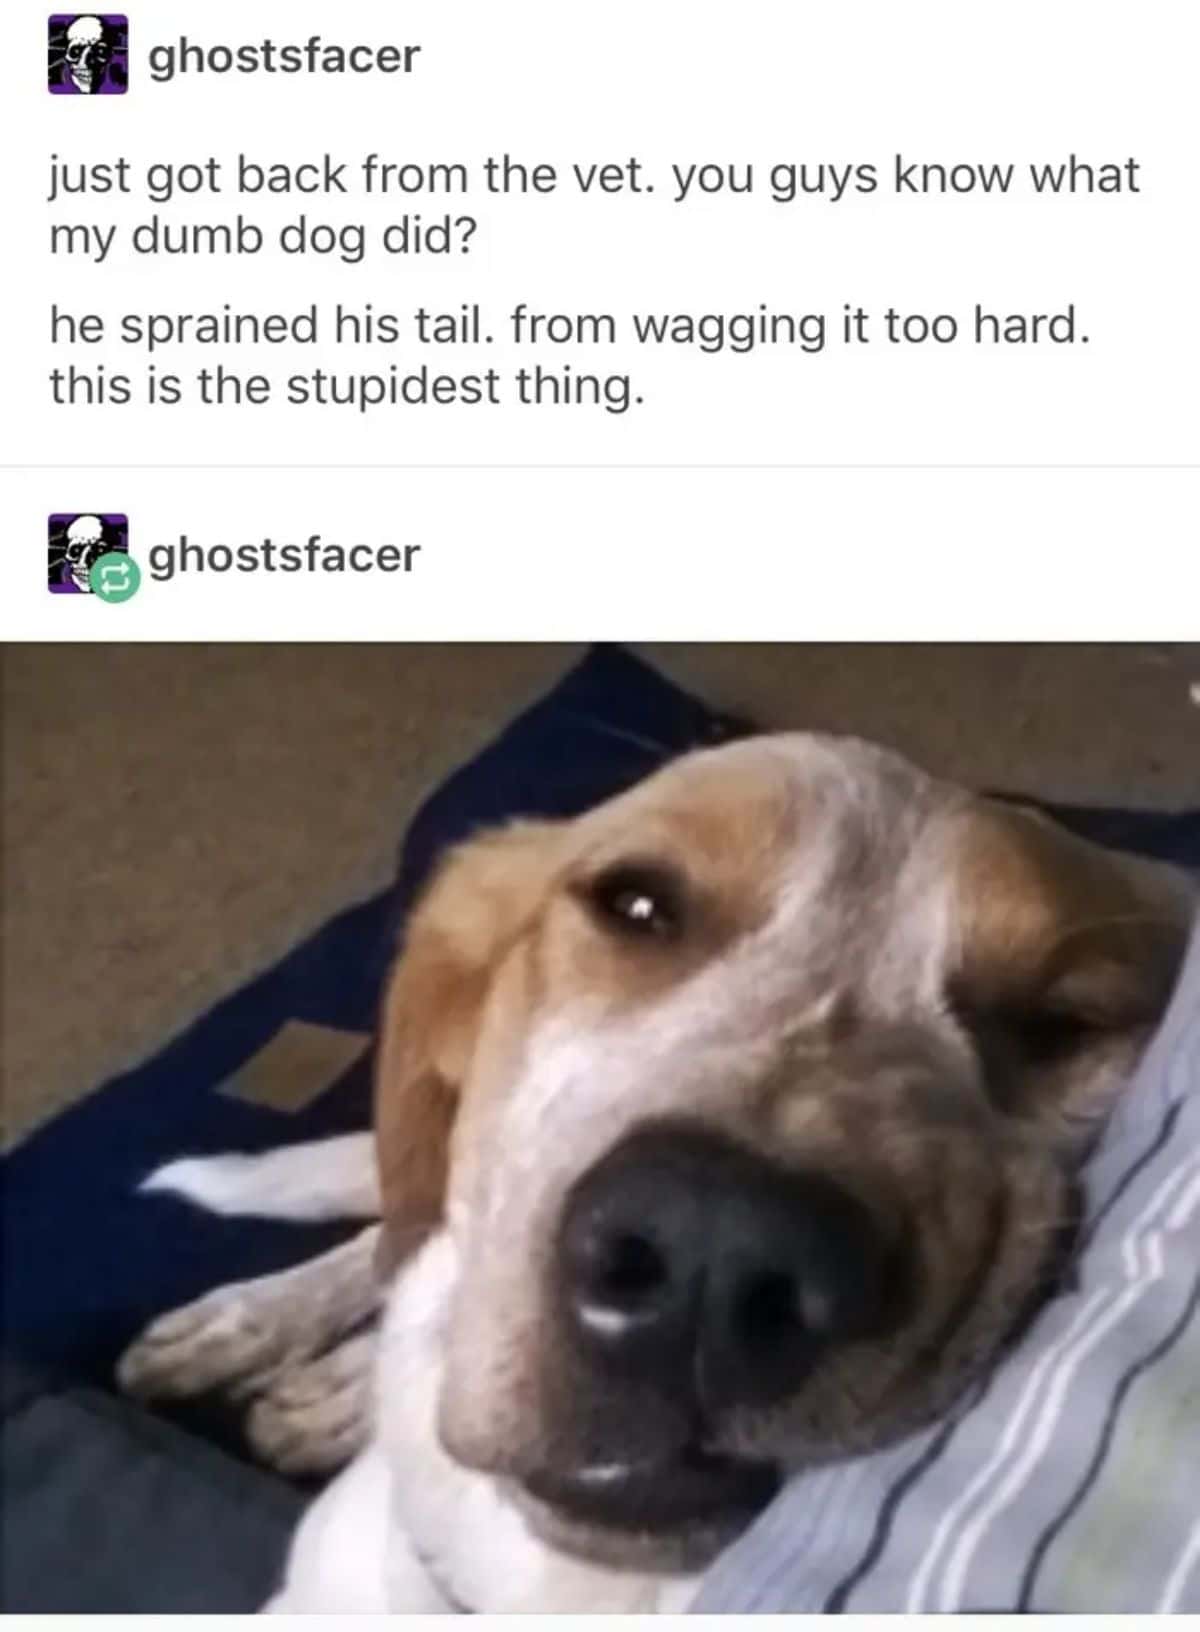 brown and white dog laying head on a bed while on the floor with caption saying the dog sprained the tail from wagging too hard